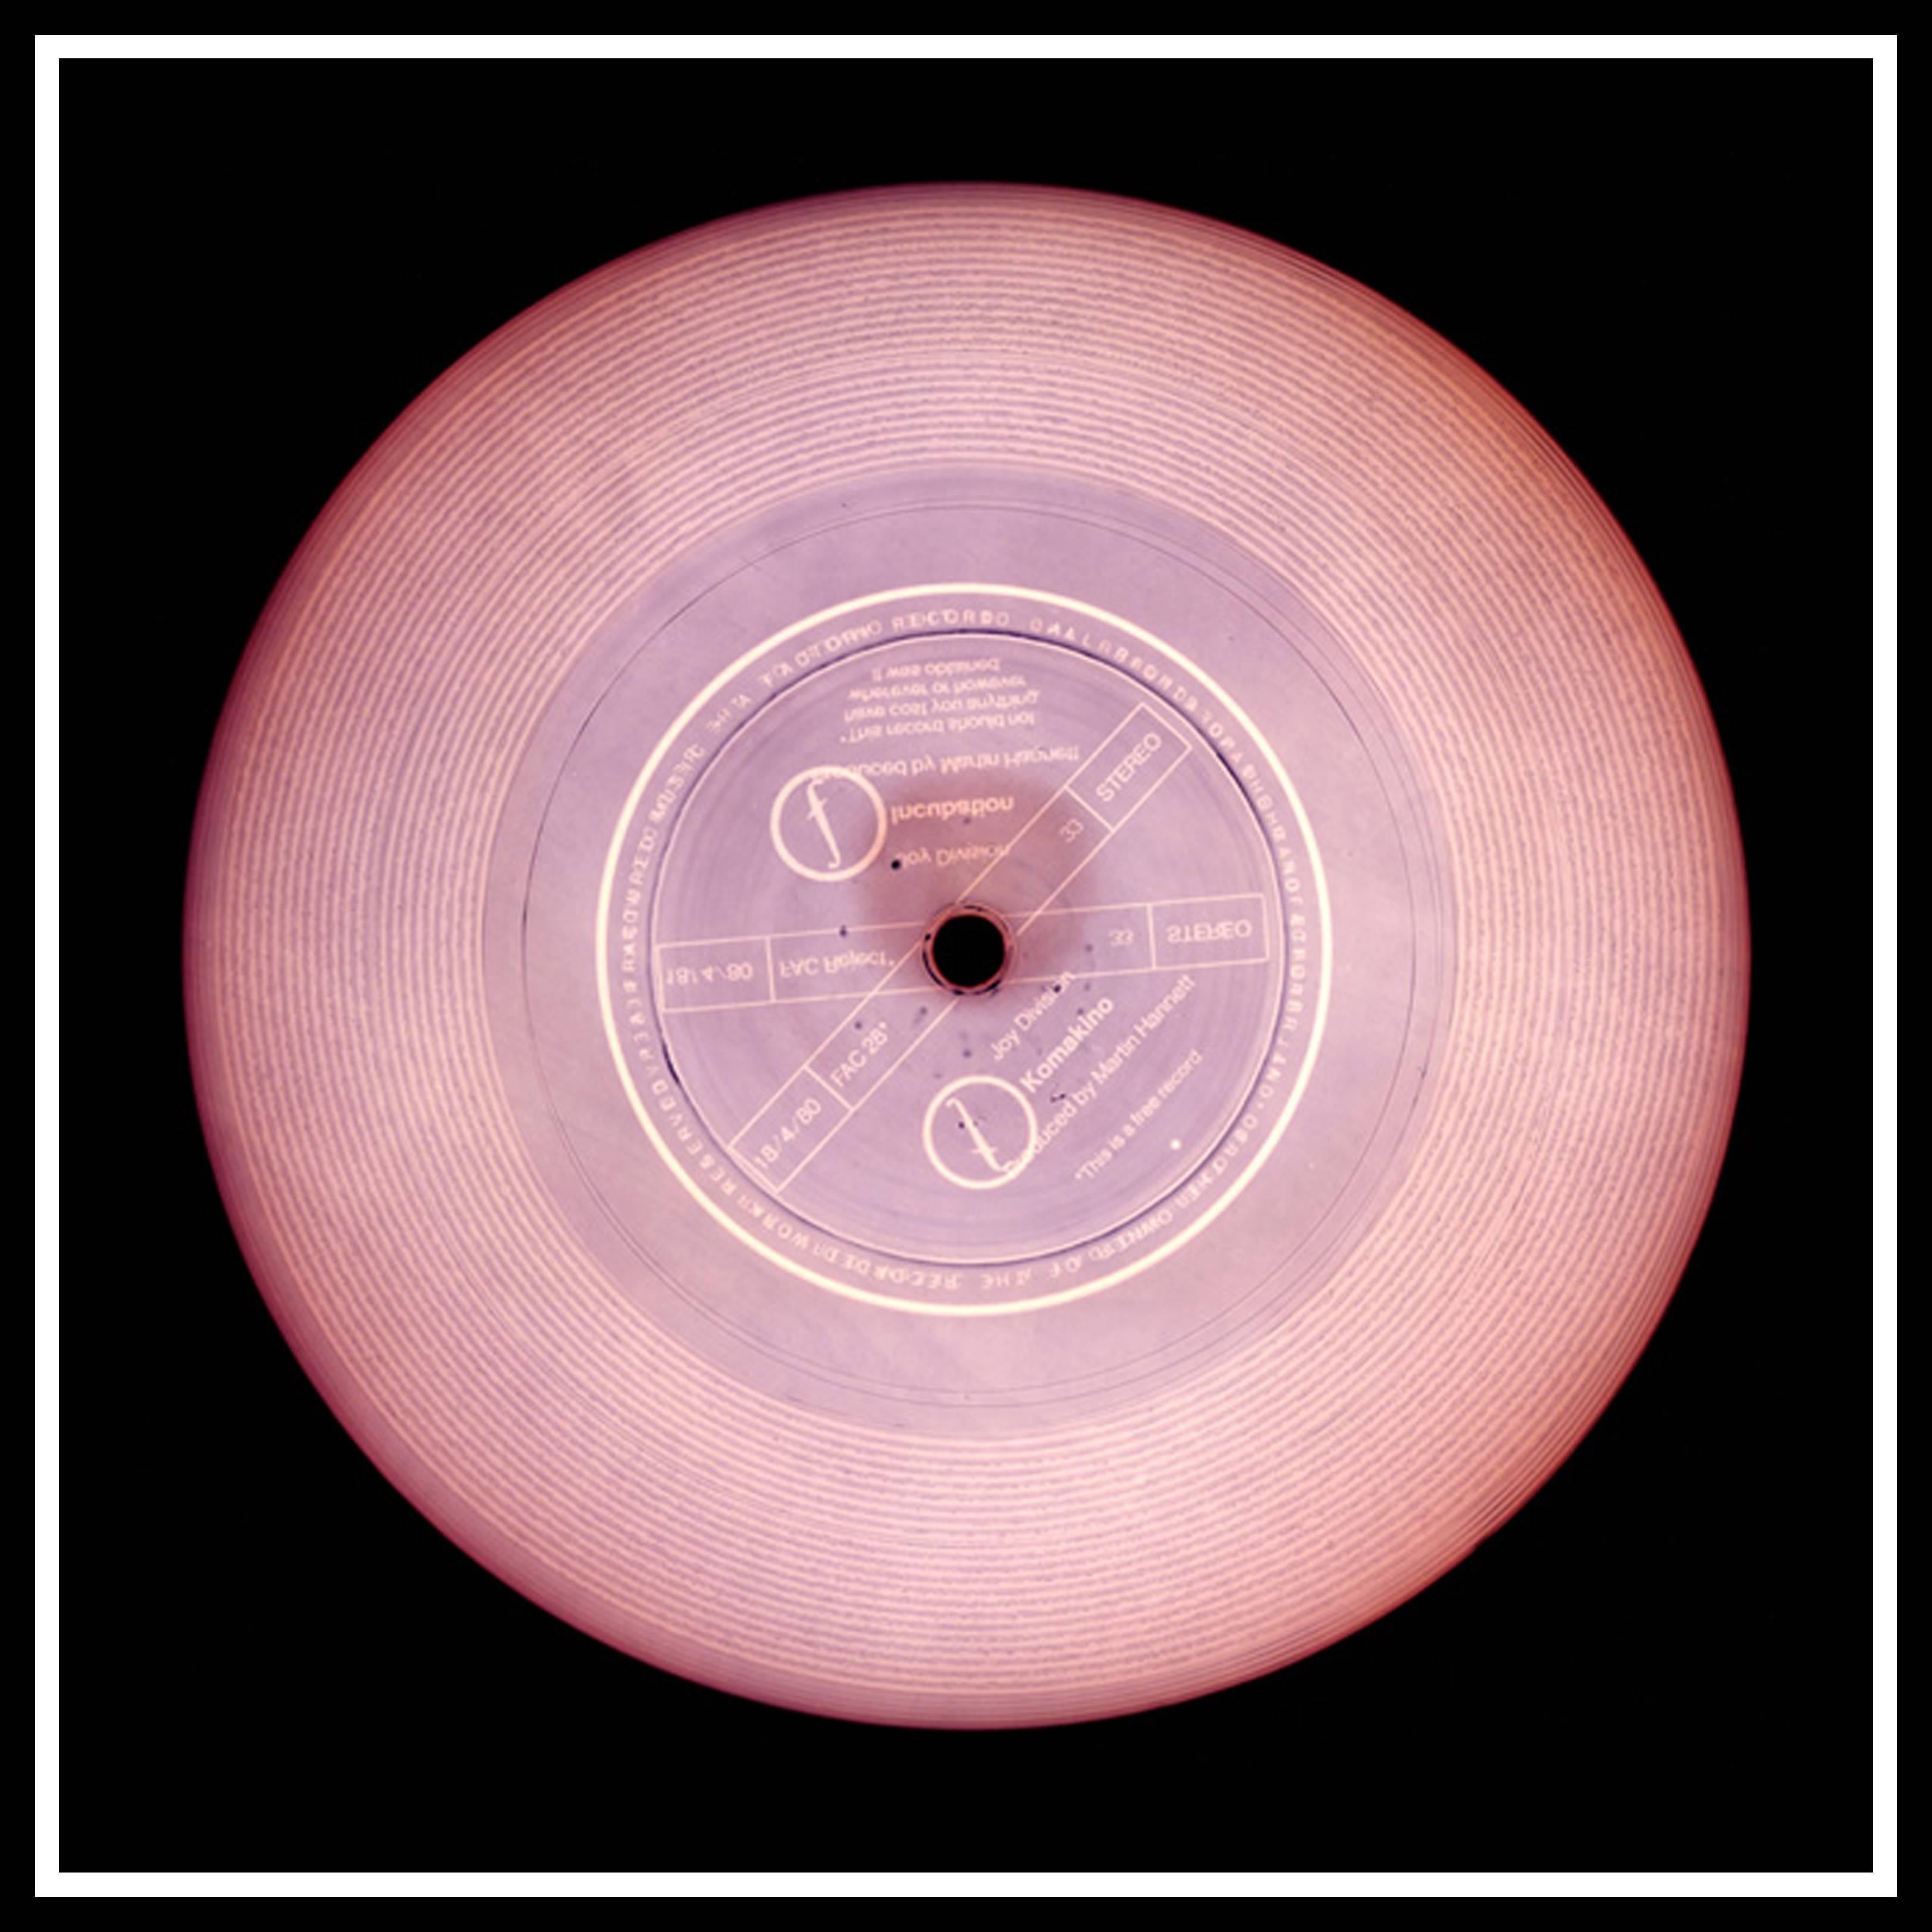 Vinyl Collection, This is a Free Record (Mauve) - Conceptual Pop Art Photography For Sale 1